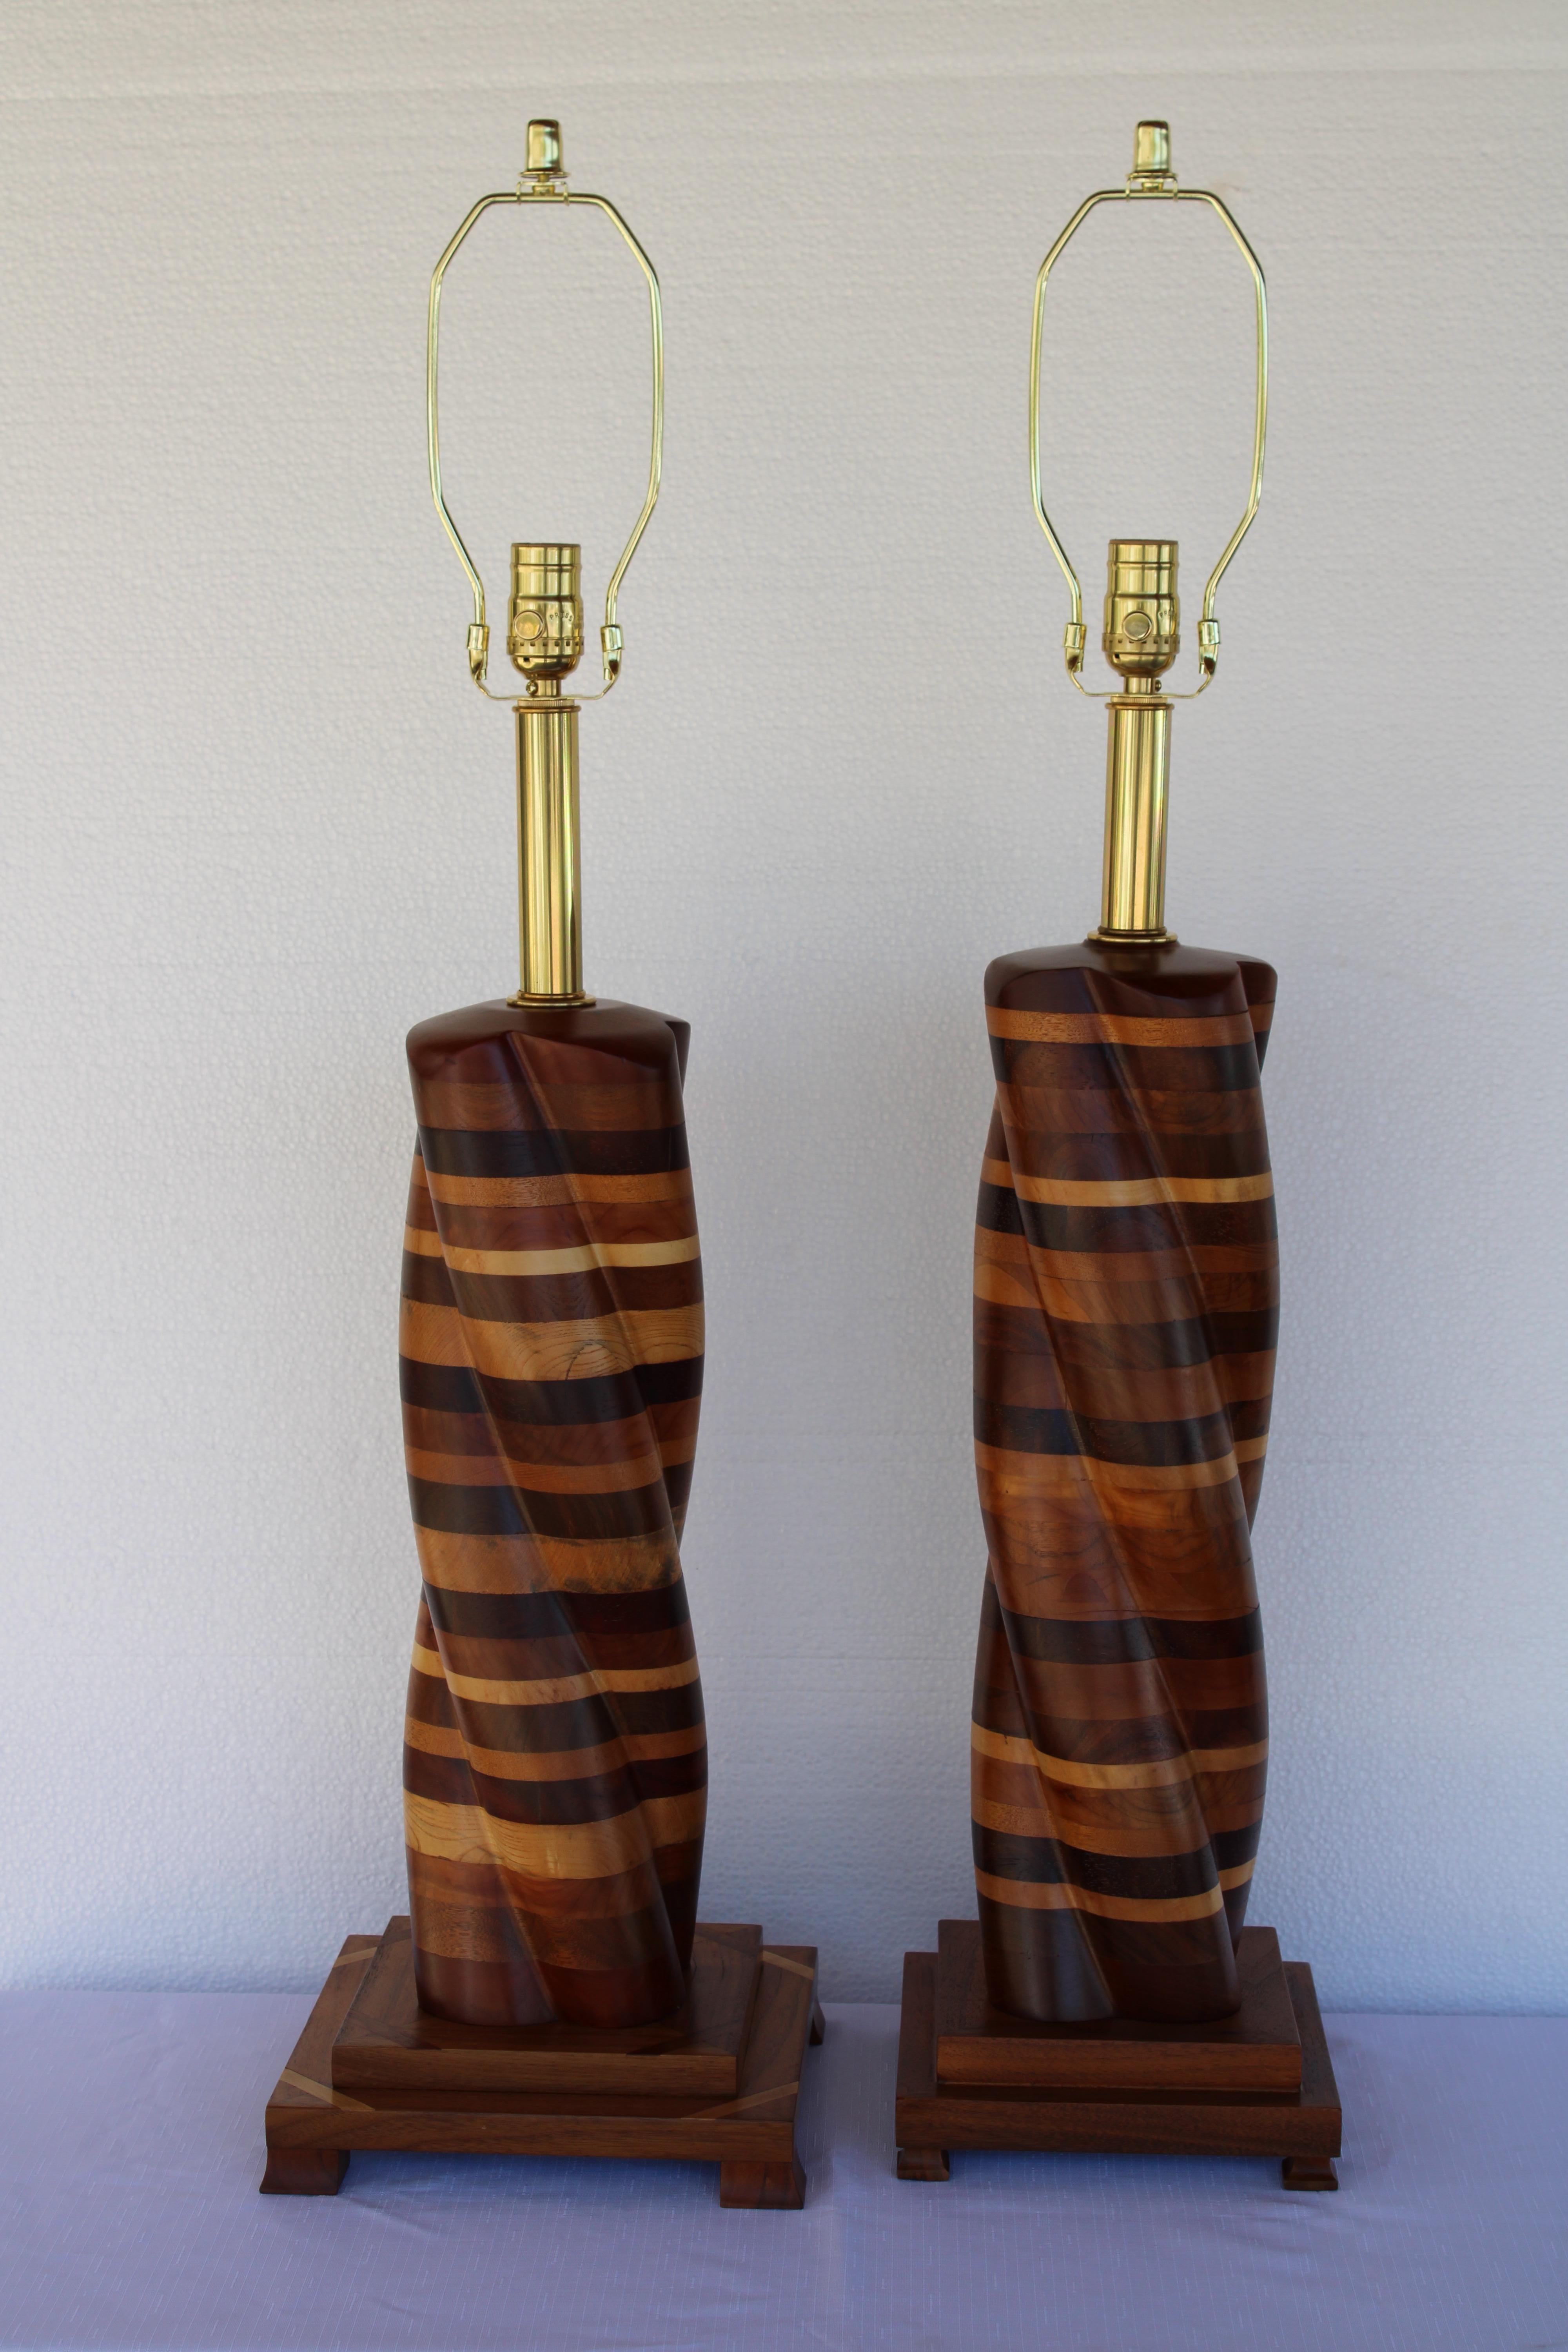 Pair of parquetry turned wood lamps.  Short lamp has a base that measures 9.25